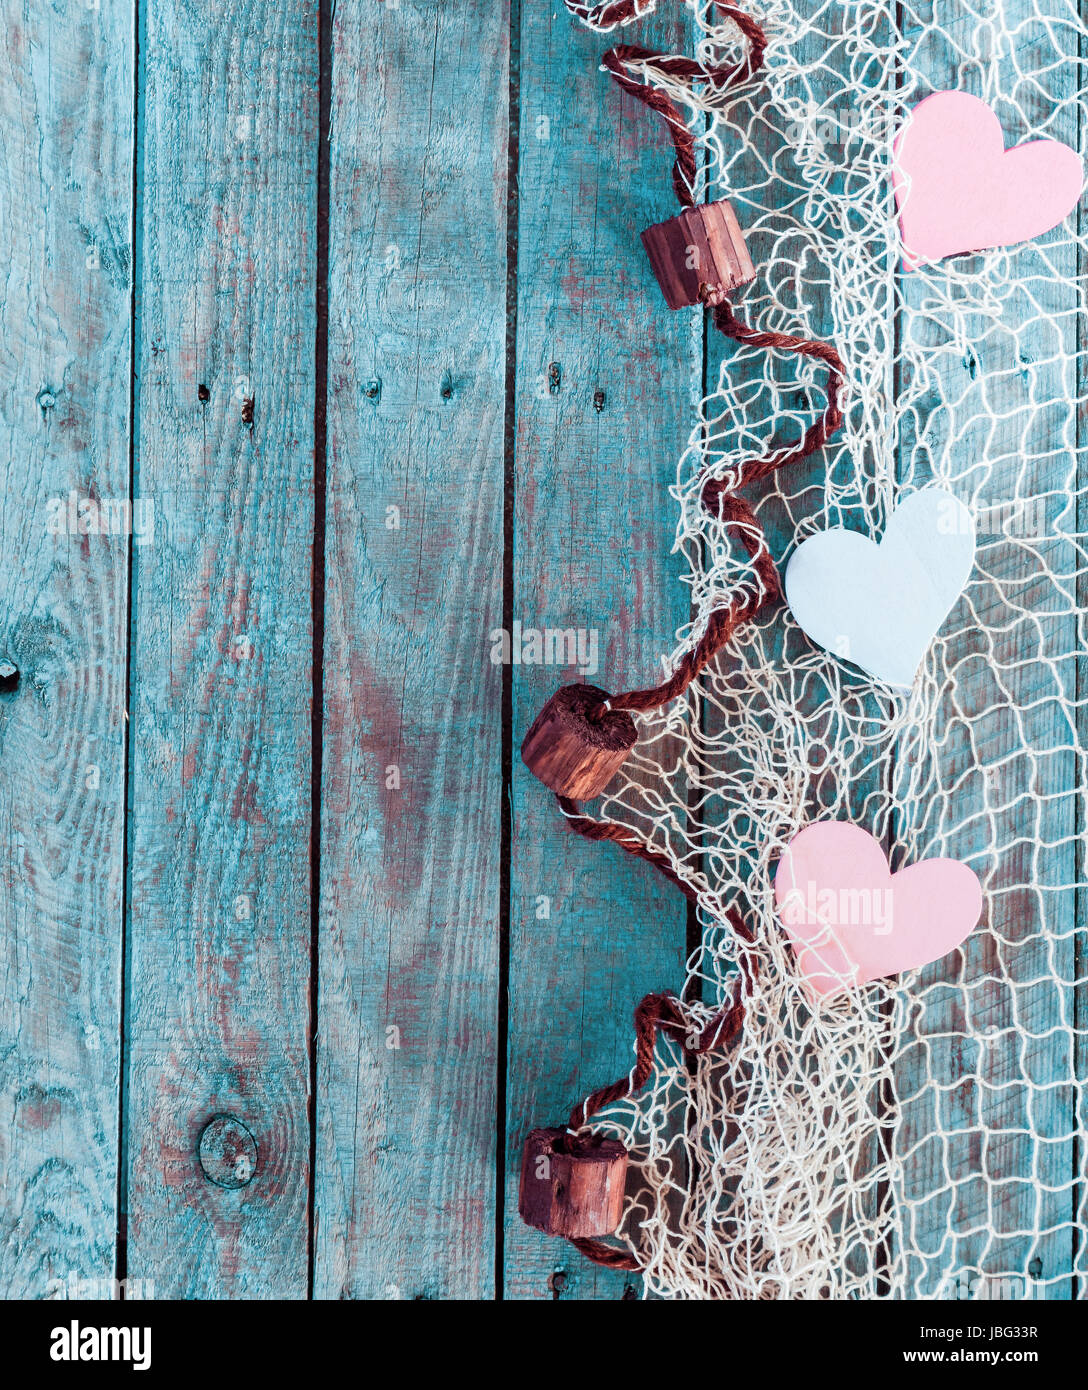 https://c8.alamy.com/comp/JBG33R/border-of-romantic-pink-and-white-hearts-in-fishing-net-with-an-edge-JBG33R.jpg